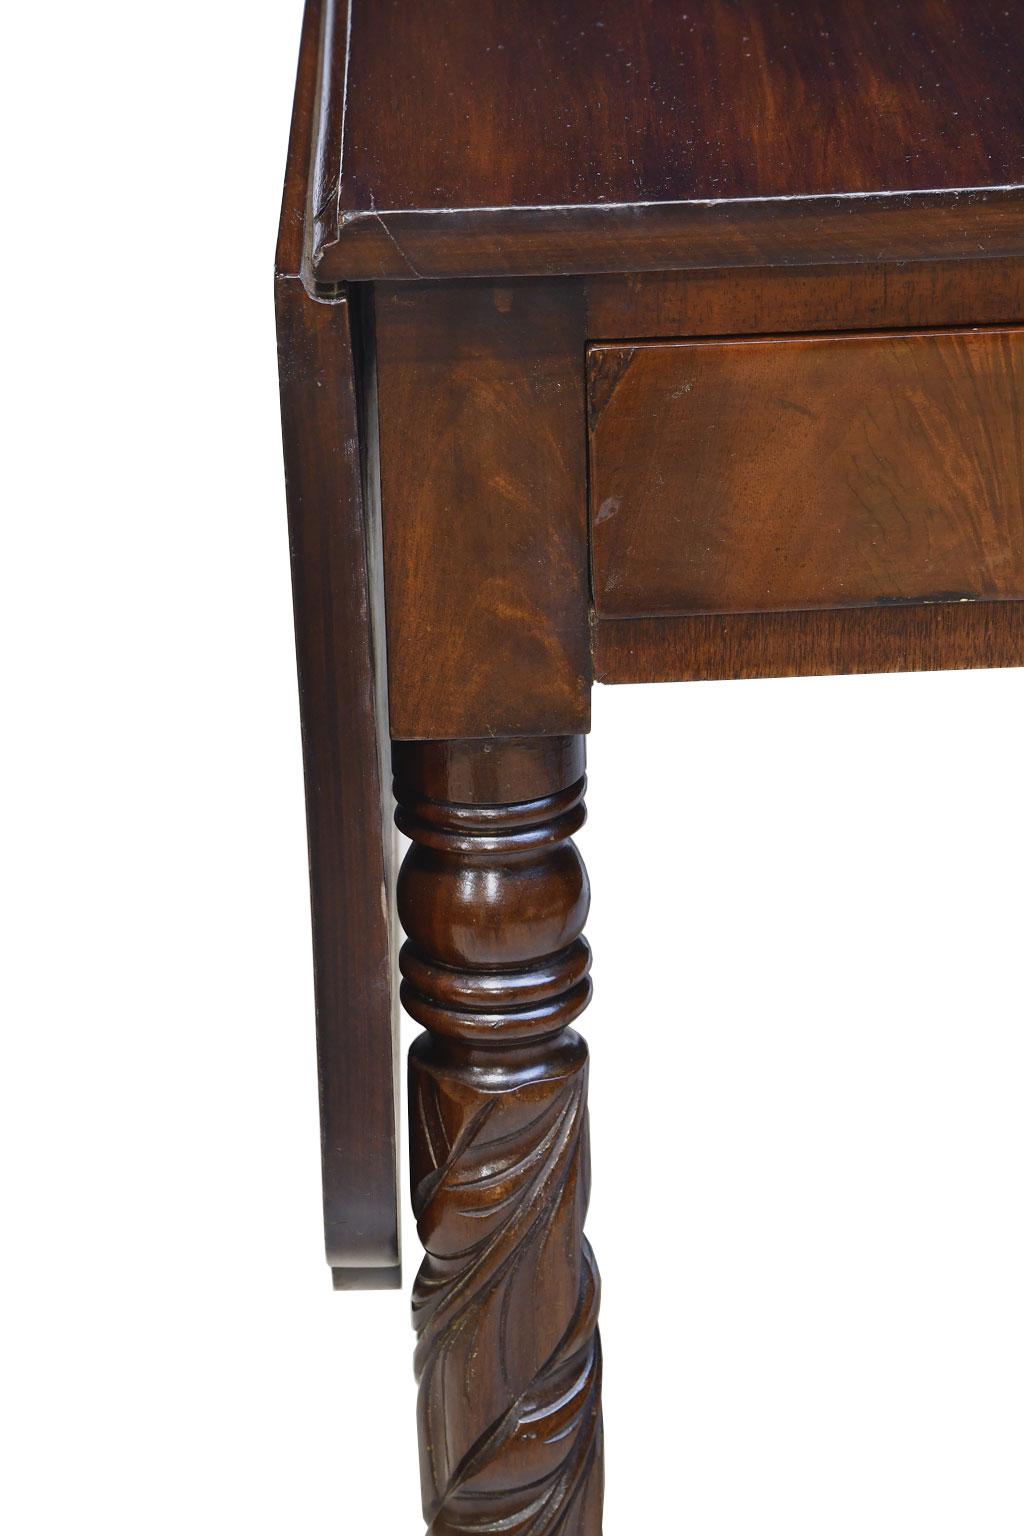 Early 19th Century Federal Drop-Leaf Table in Mahogany, circa 1825 For Sale